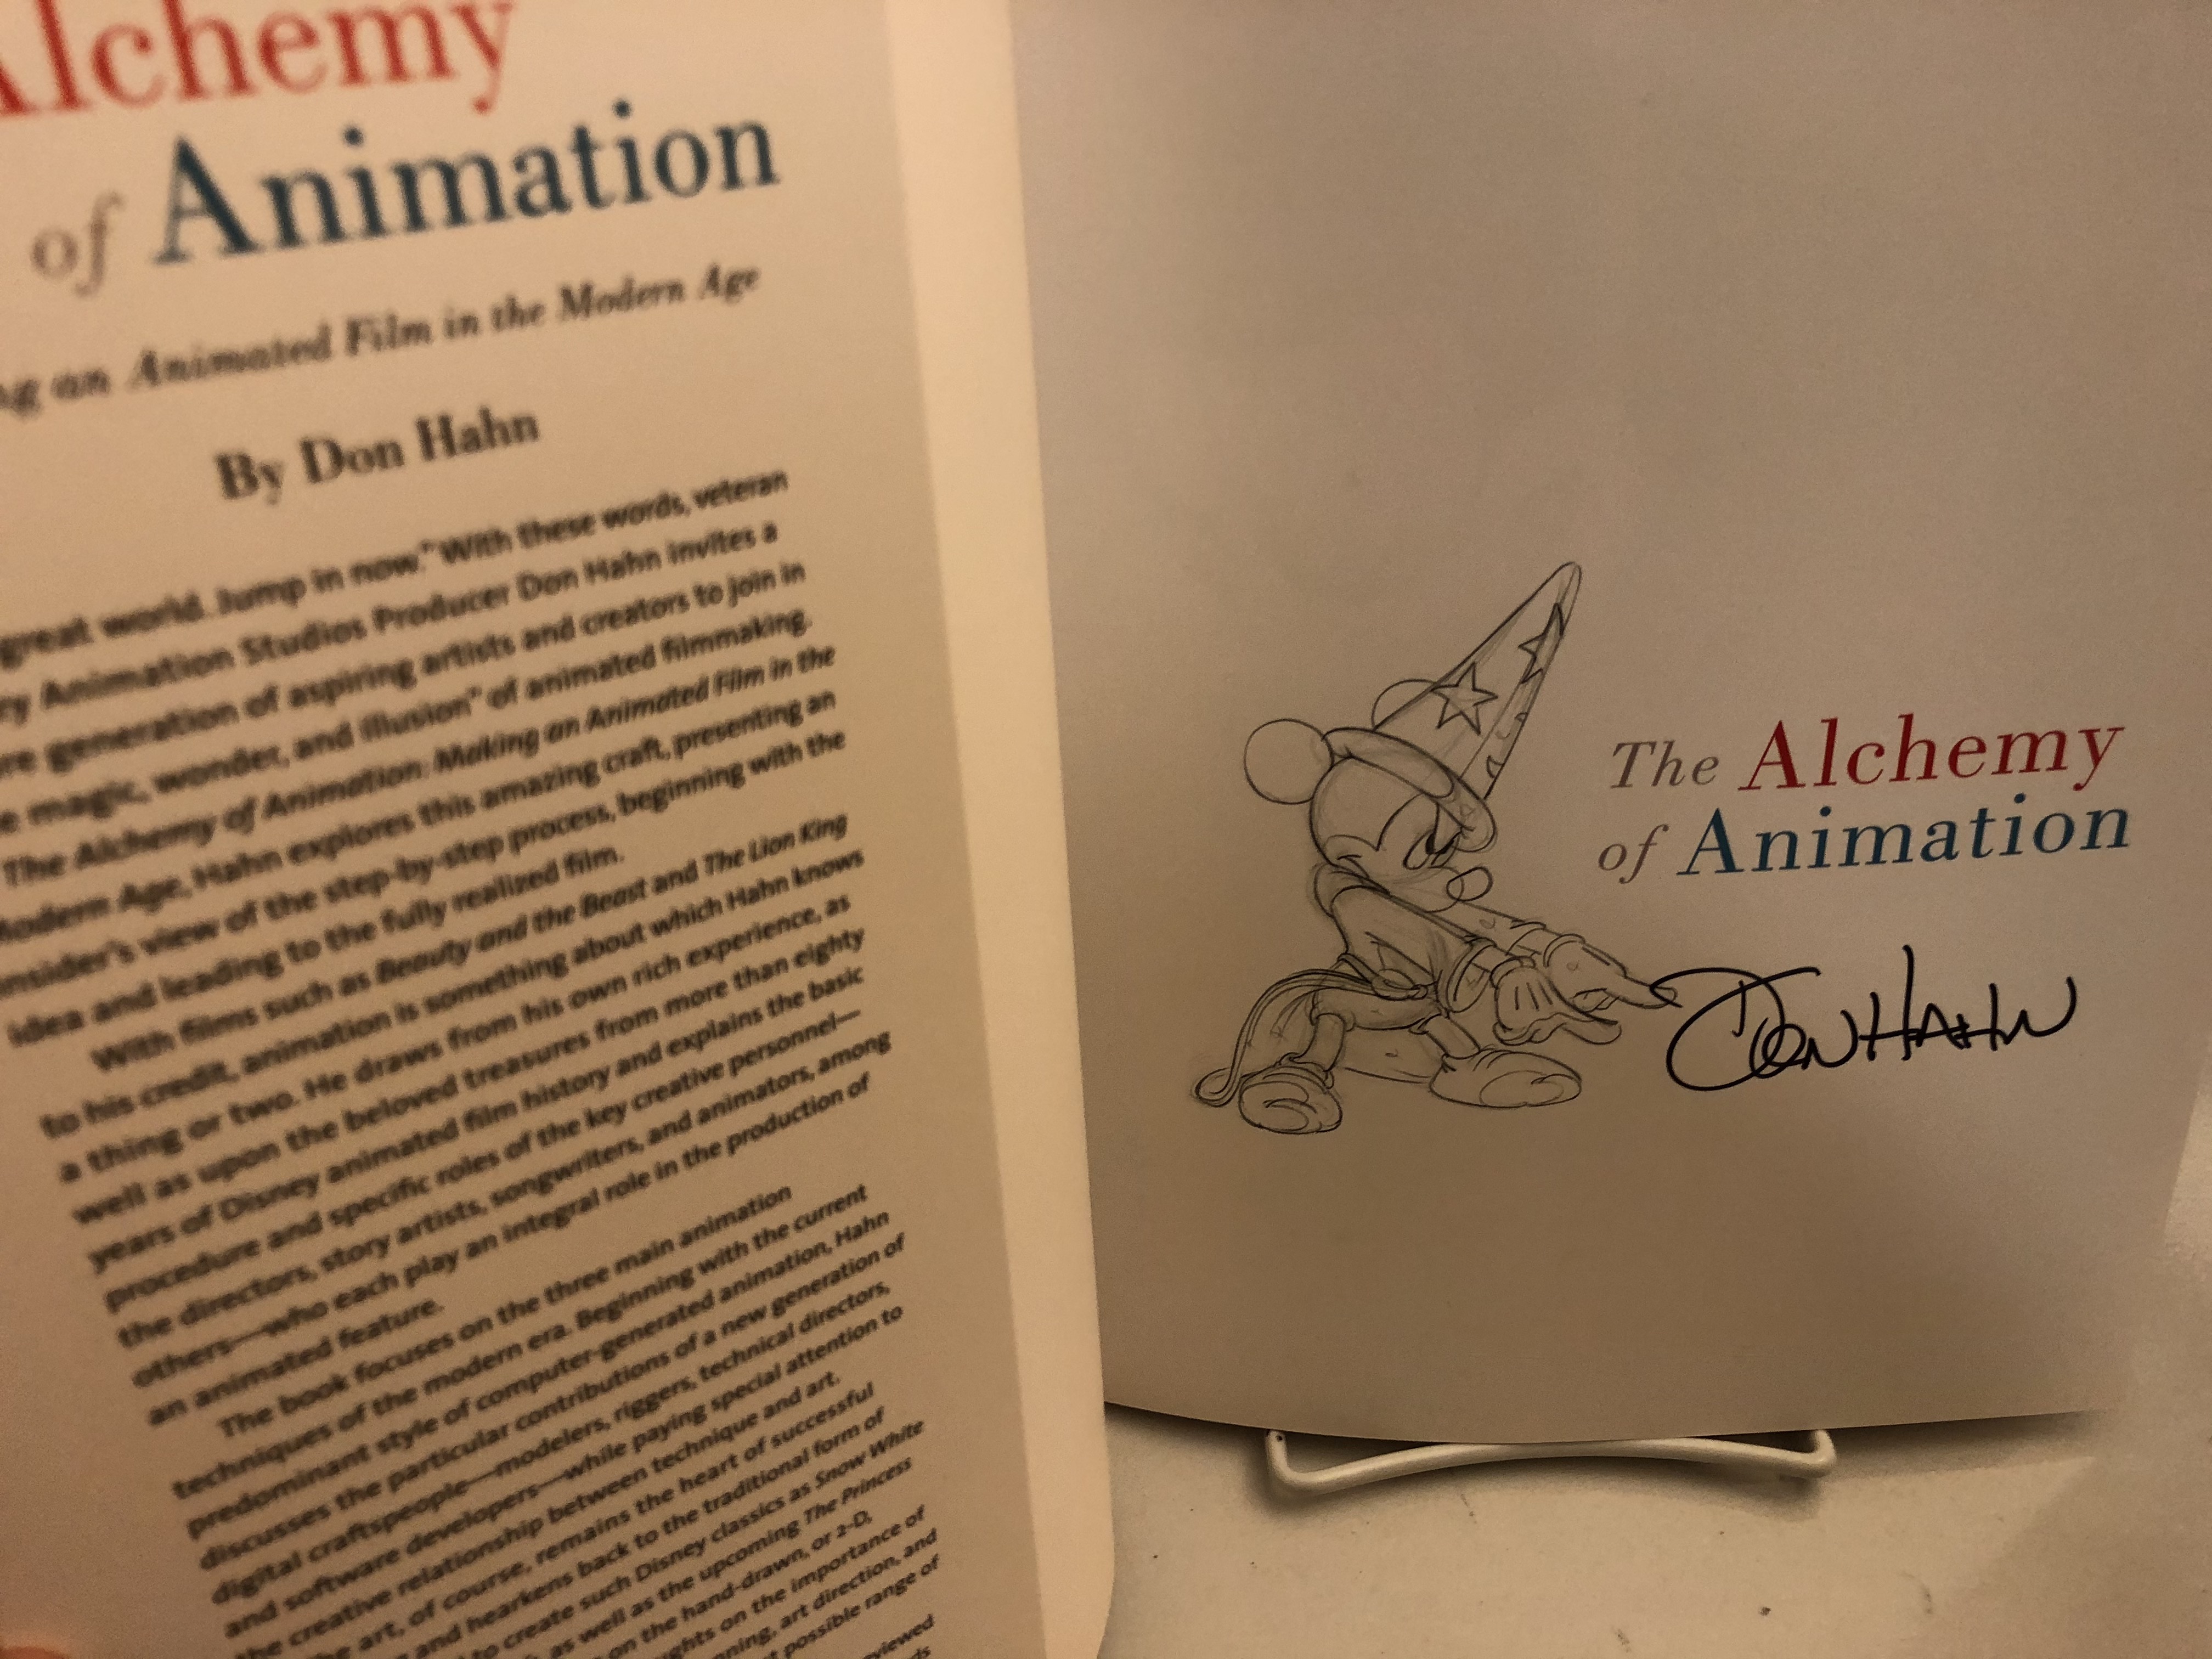 The Alchemy of Animation: Making an Animated Film in the Modern Age by  Hahn, Don: New Soft cover (2008) 1st Edition., Signed by Author | Needham  Book Finders